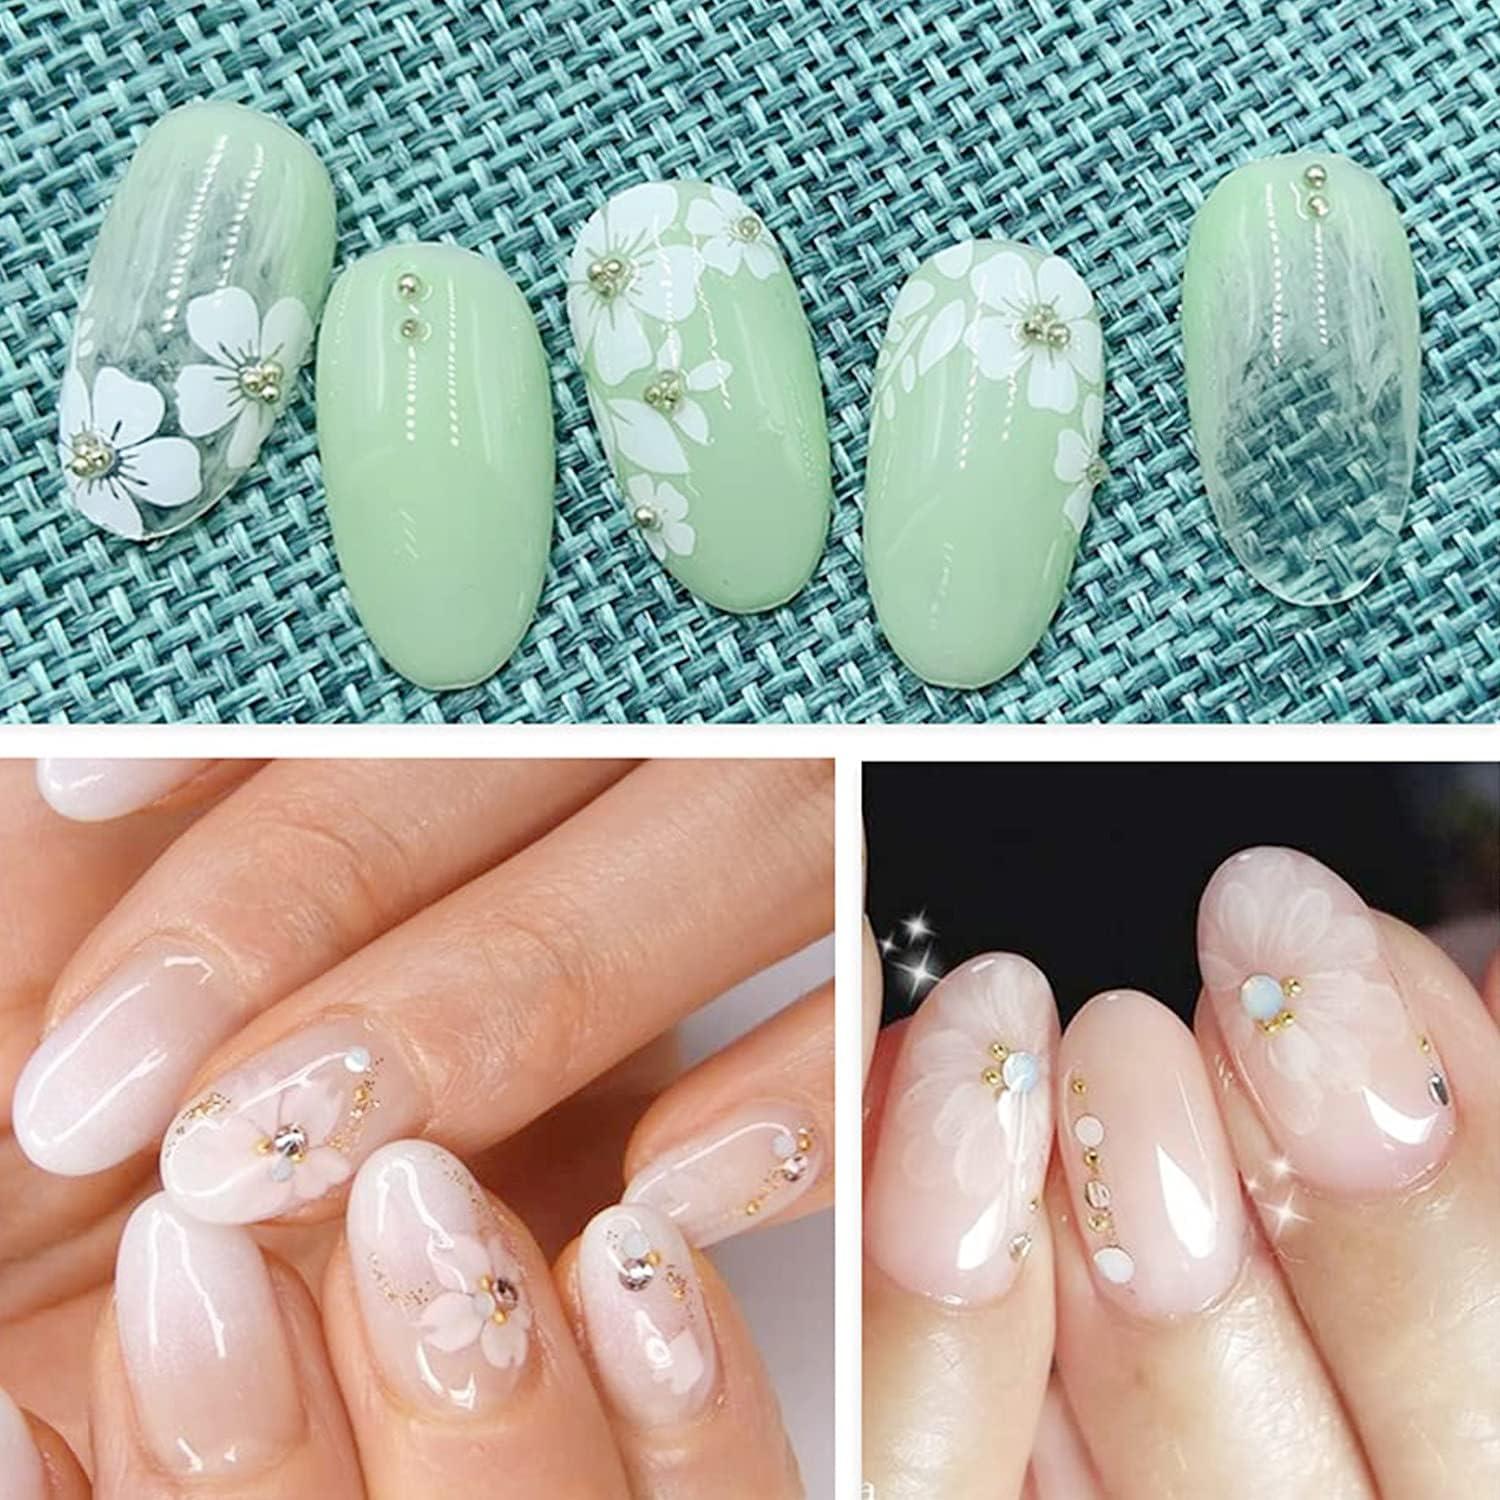 4pcs 3D Flower Nail - Acrylic Flowers For Nail Arts